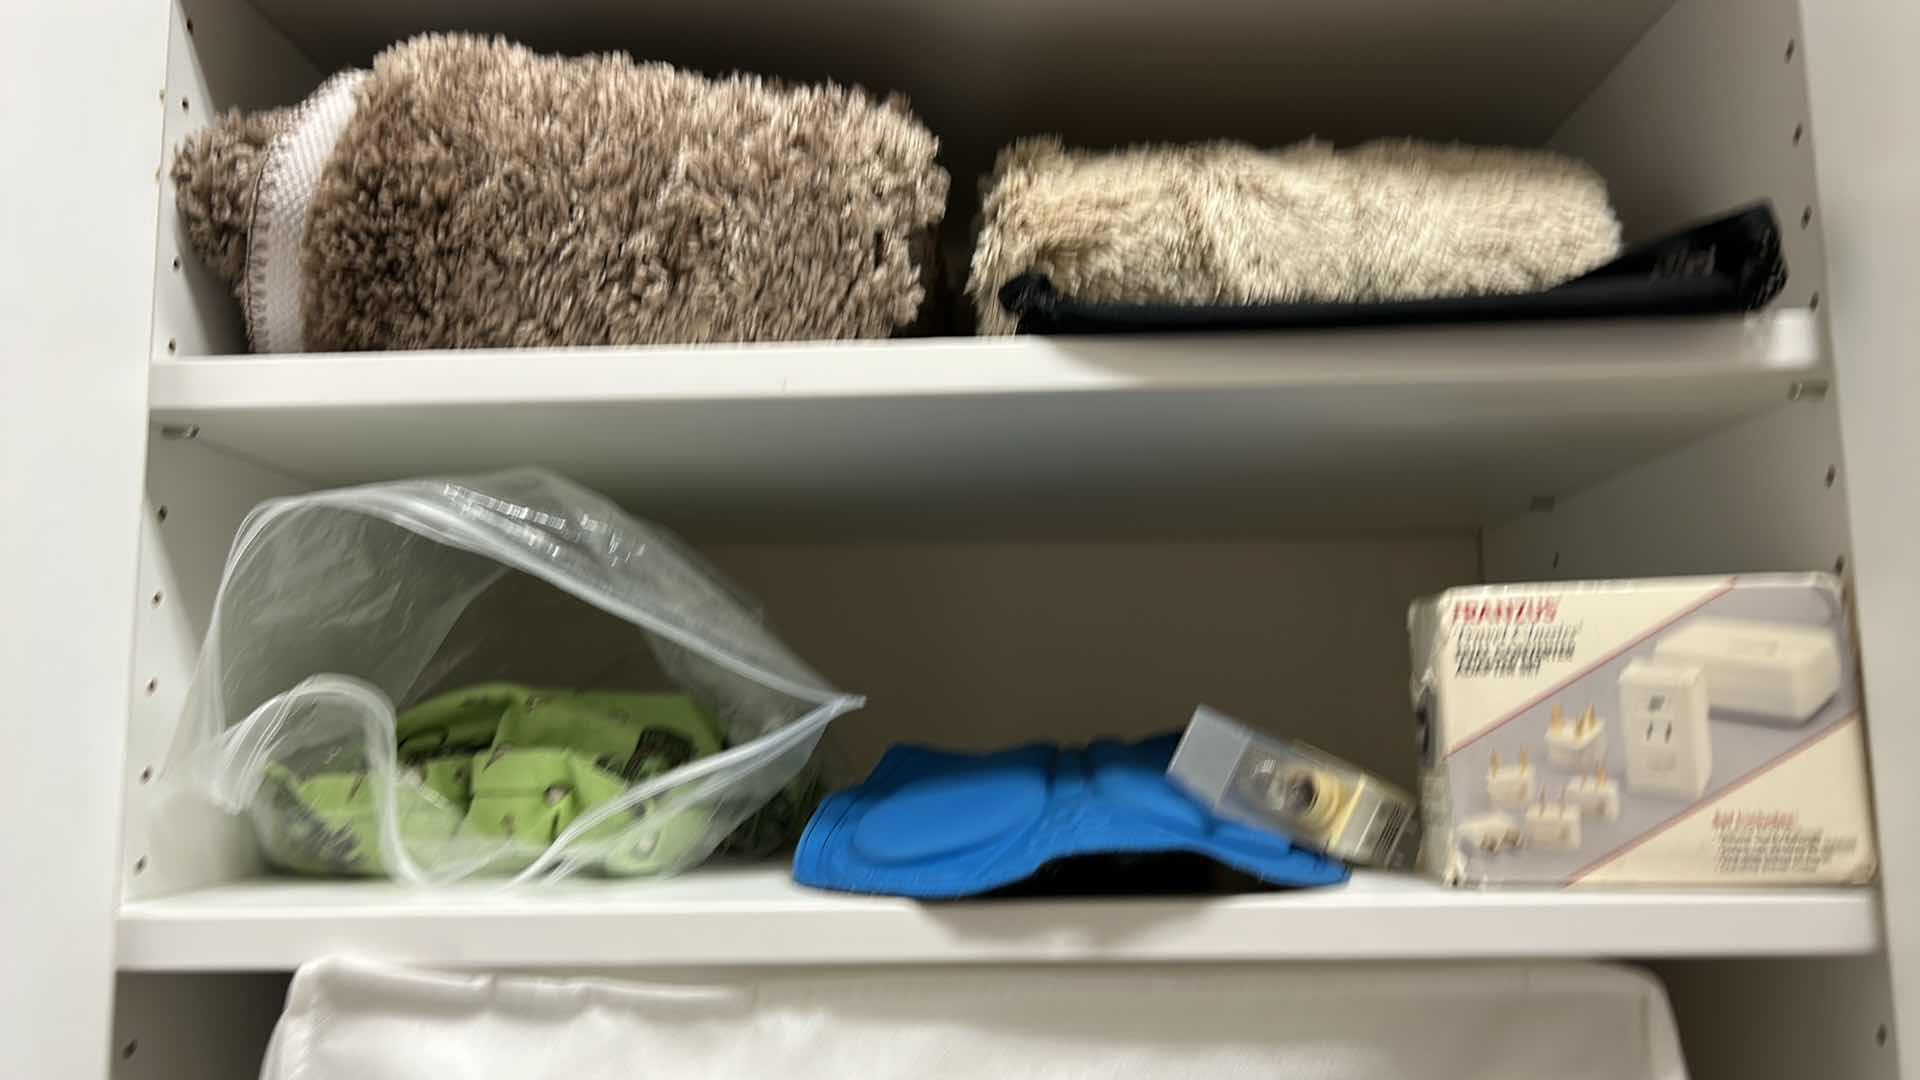 Photo 7 of Contents of cabinet in walk-in closet